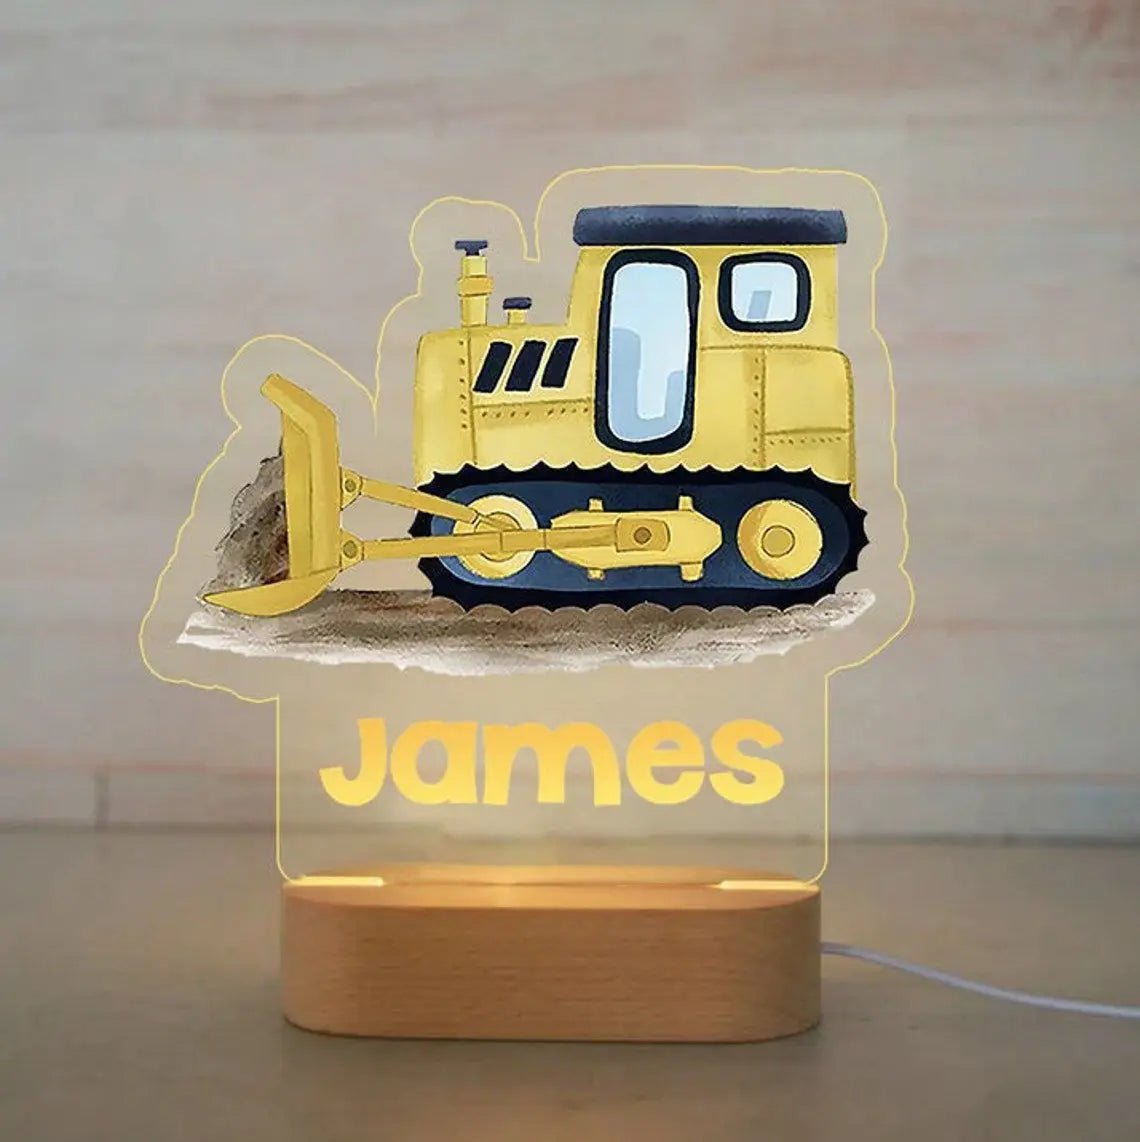 Customized Animal-themed Night Light for Kids - Personalized with Child's Name, Acrylic Lamp for Bedroom Decor Warm Light / 29Yellow Truck